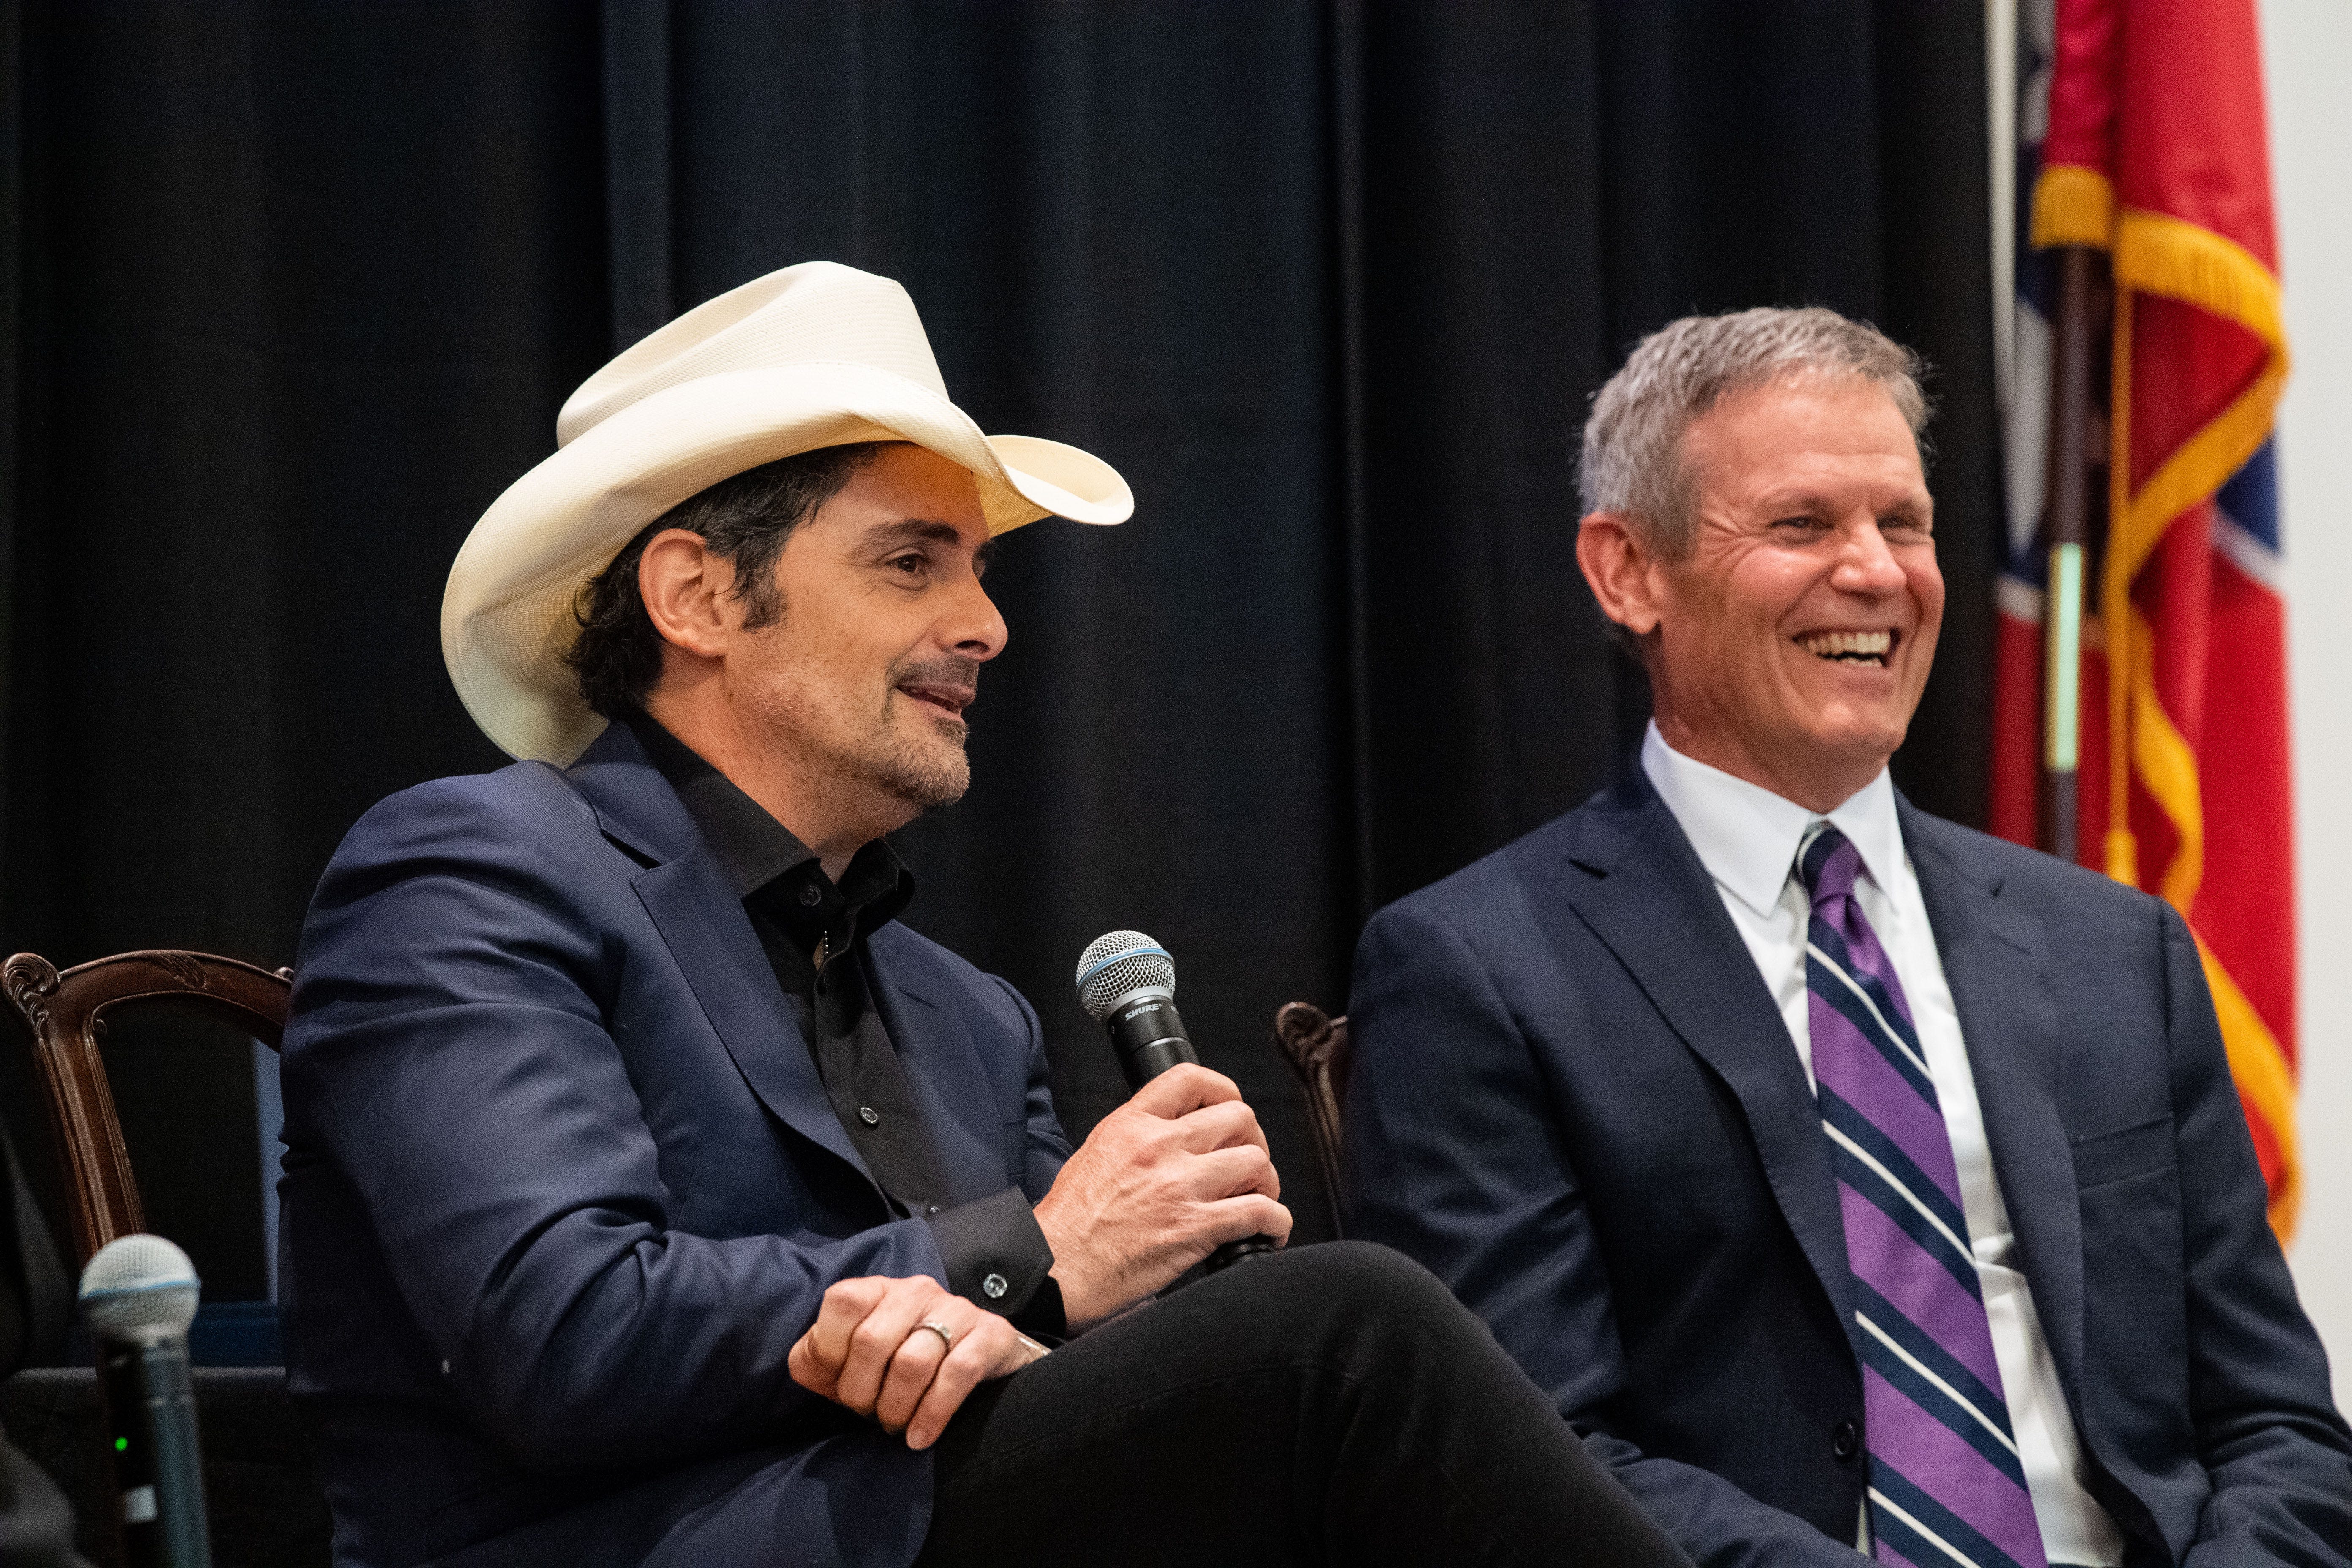 Country star Brad Paisley, FedEx, MNPS director honored for Nashville philanthropy